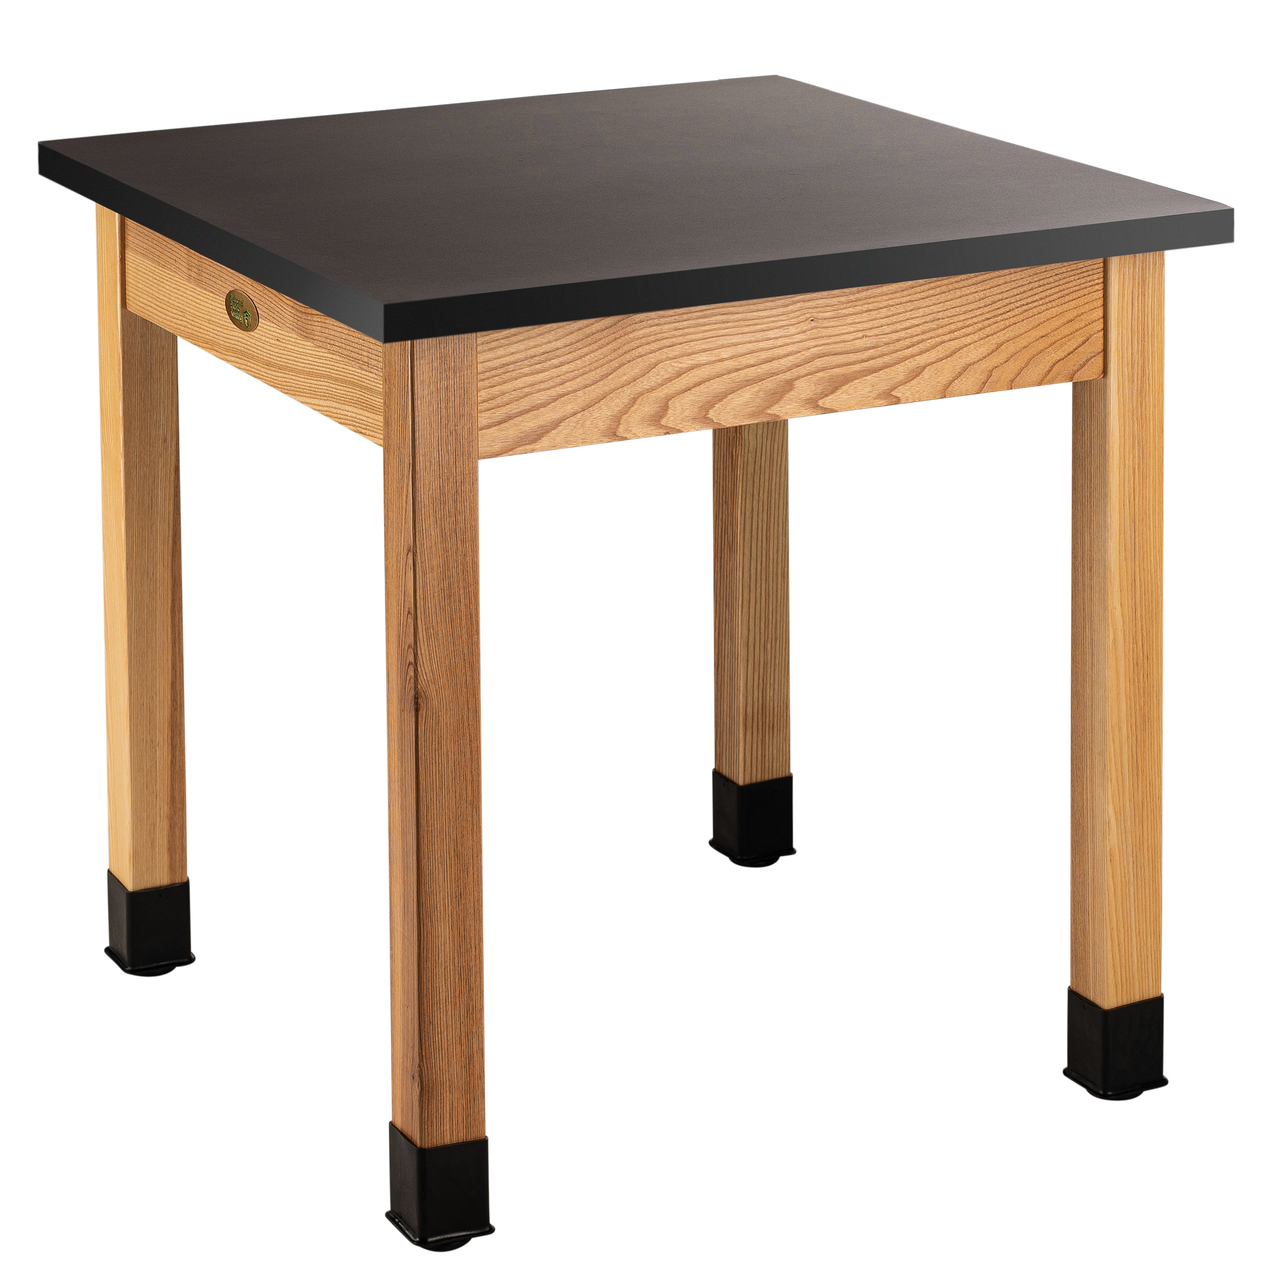 NPS Wood Science Lab Table, 30"x30"x30", Chemical Resistant Top - Black Top and Ash Leg